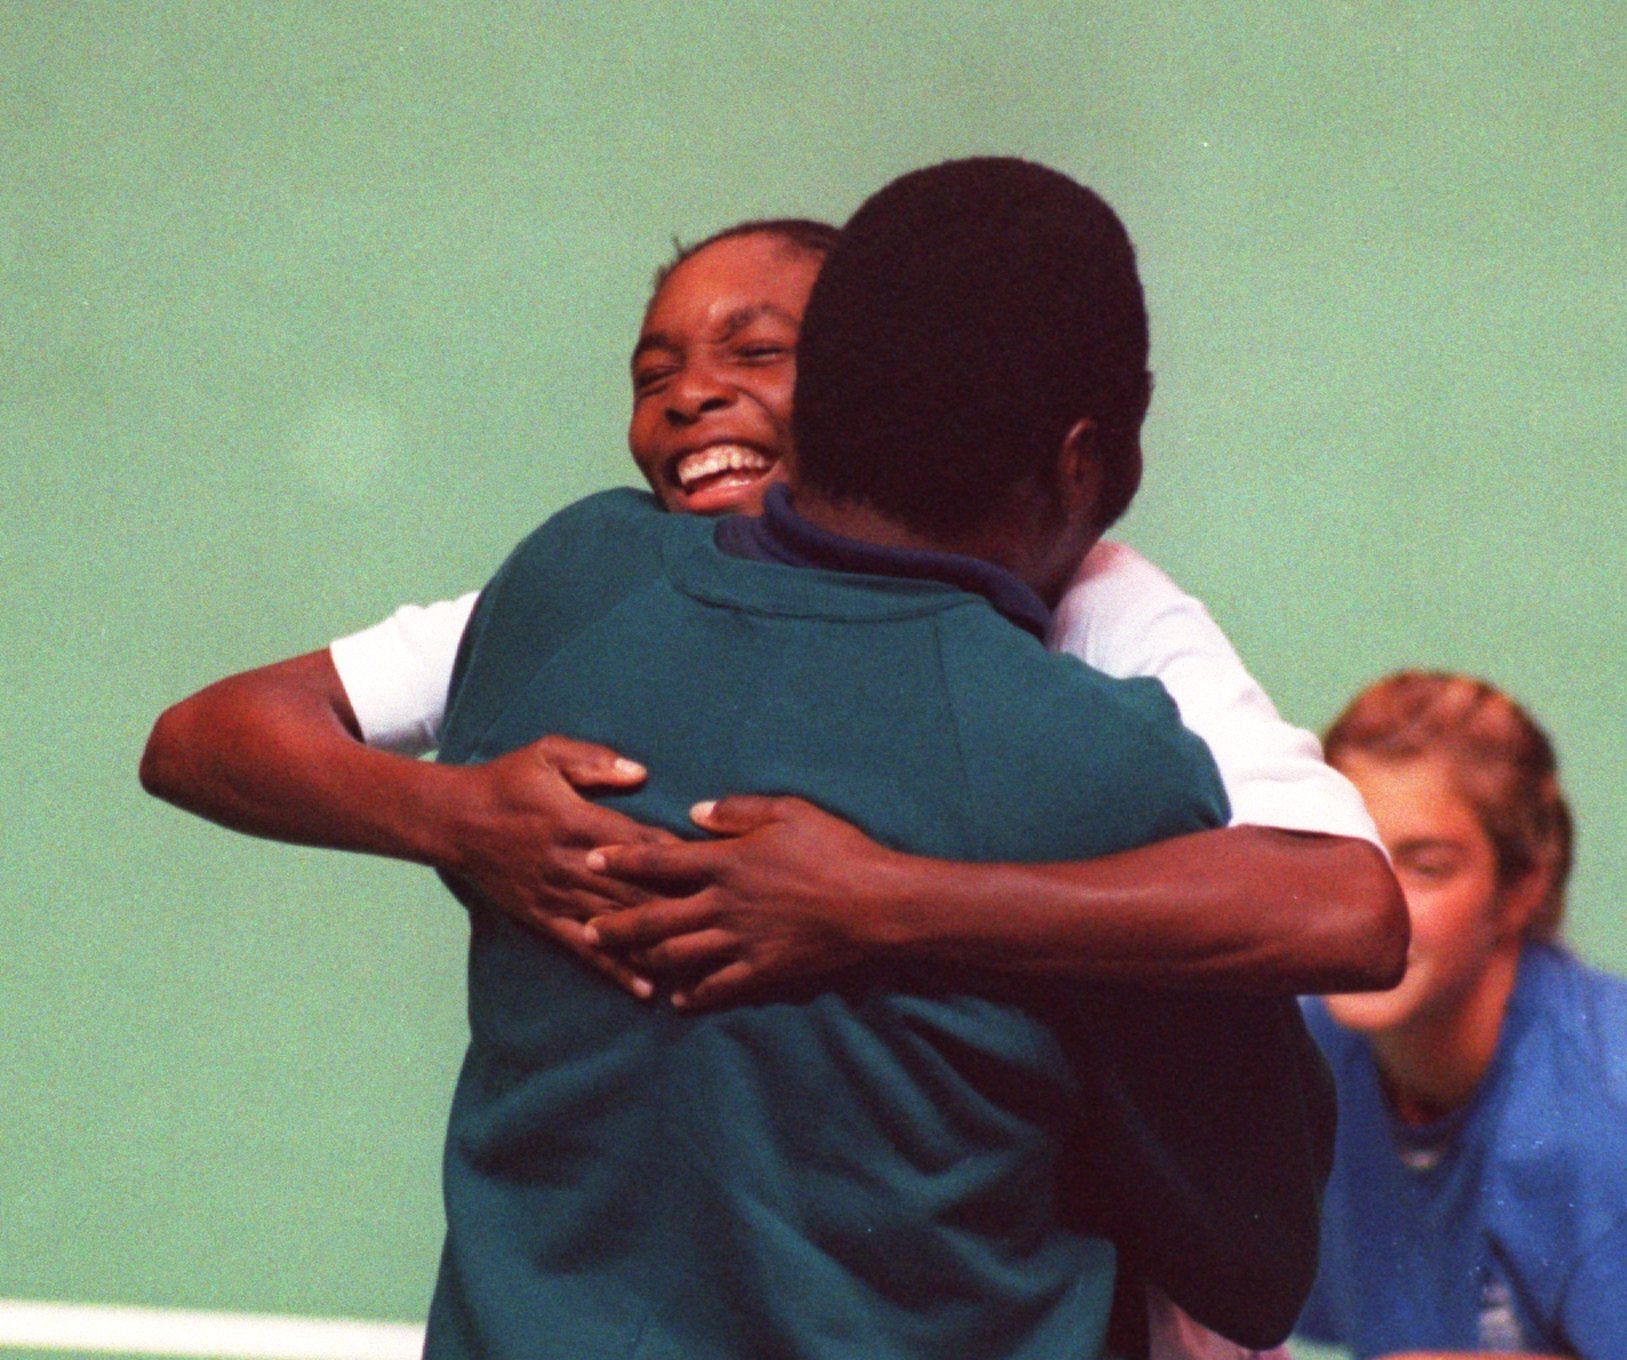 A 14-year-old Venus Williams with her father Richard Williams